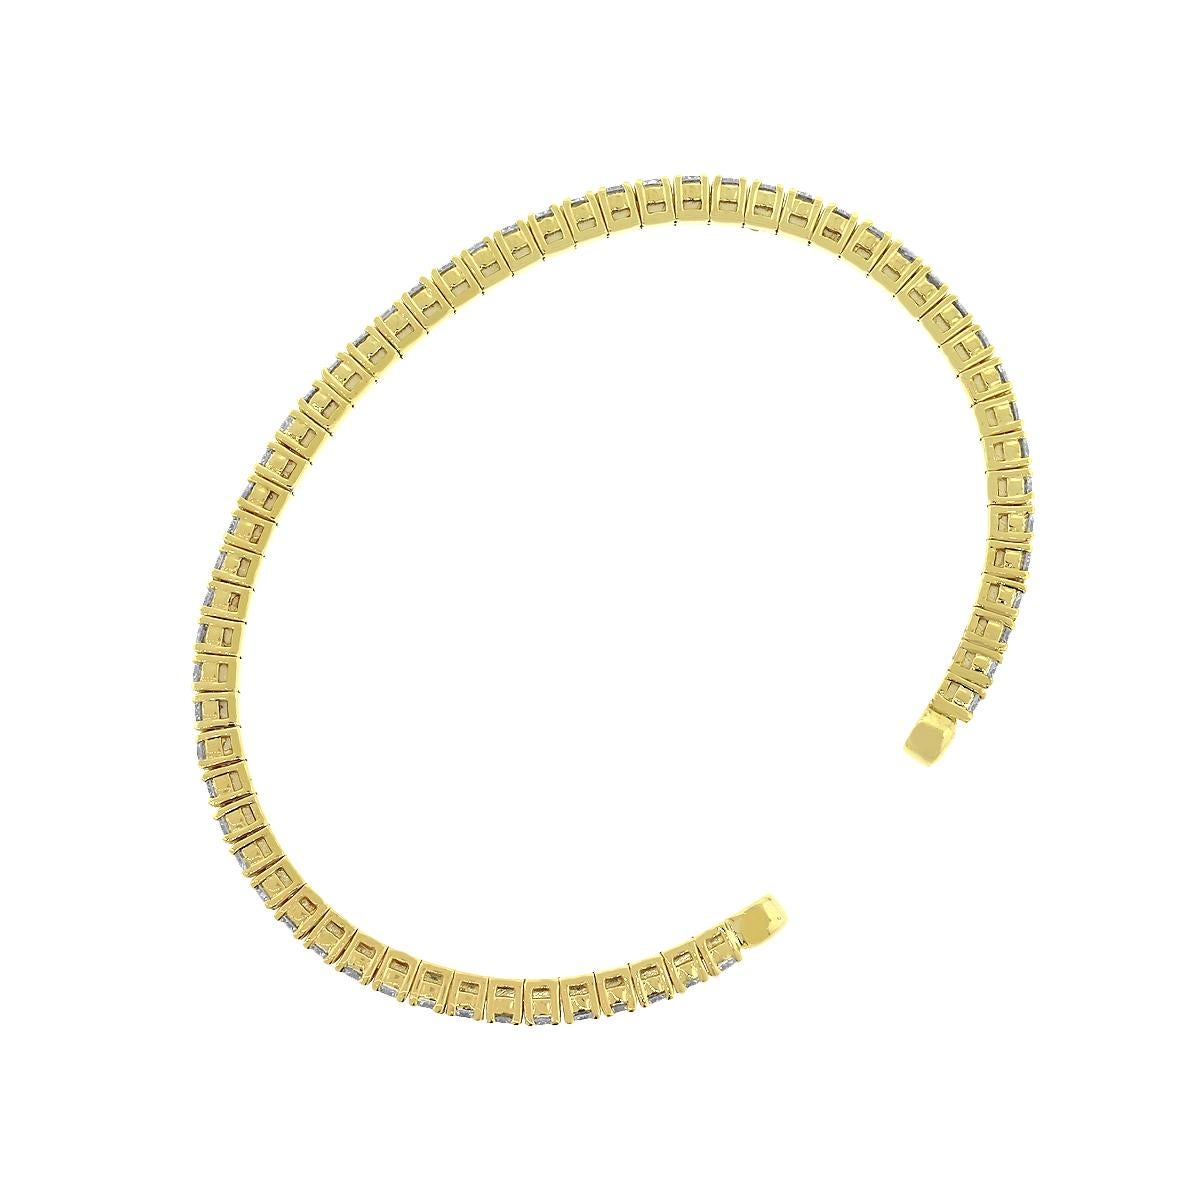 Style: Diamond Bangle
Material: 14k Yellow Gold
Diamond Details: Approximately 2.60ctw of round brilliant diamonds. Diamonds are G/H in color and VS in clarity.
Total Weight: 8.9g (5.7dwt)
Bracelet Measurements: Will fit a 6″ Wrist
SKU: A30311894